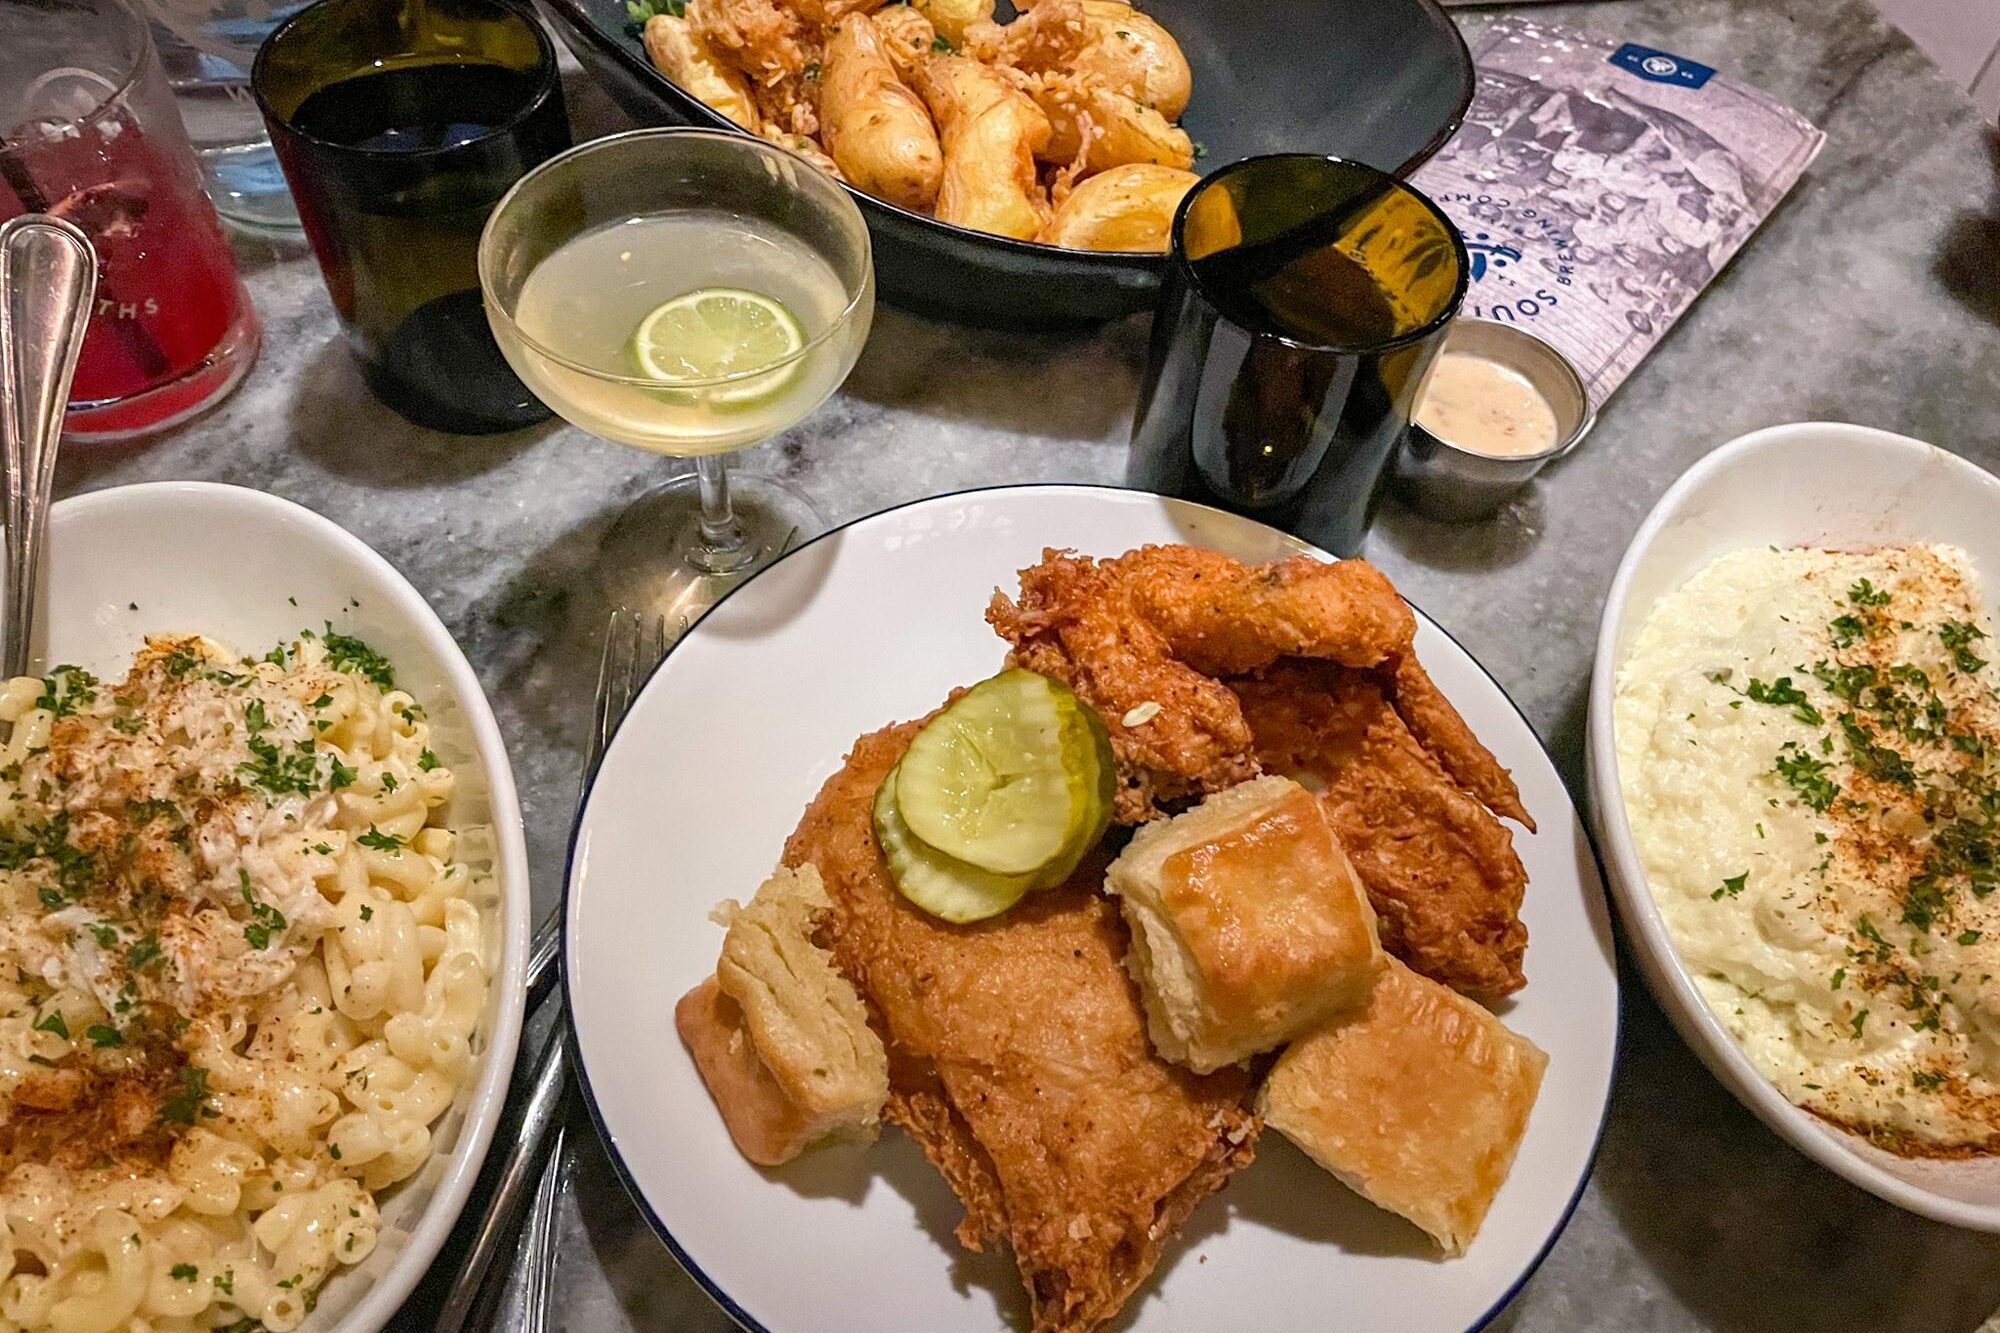 Fried chicken, grits, Mac and cheese, potatoes, and cocktails at Southerleigh